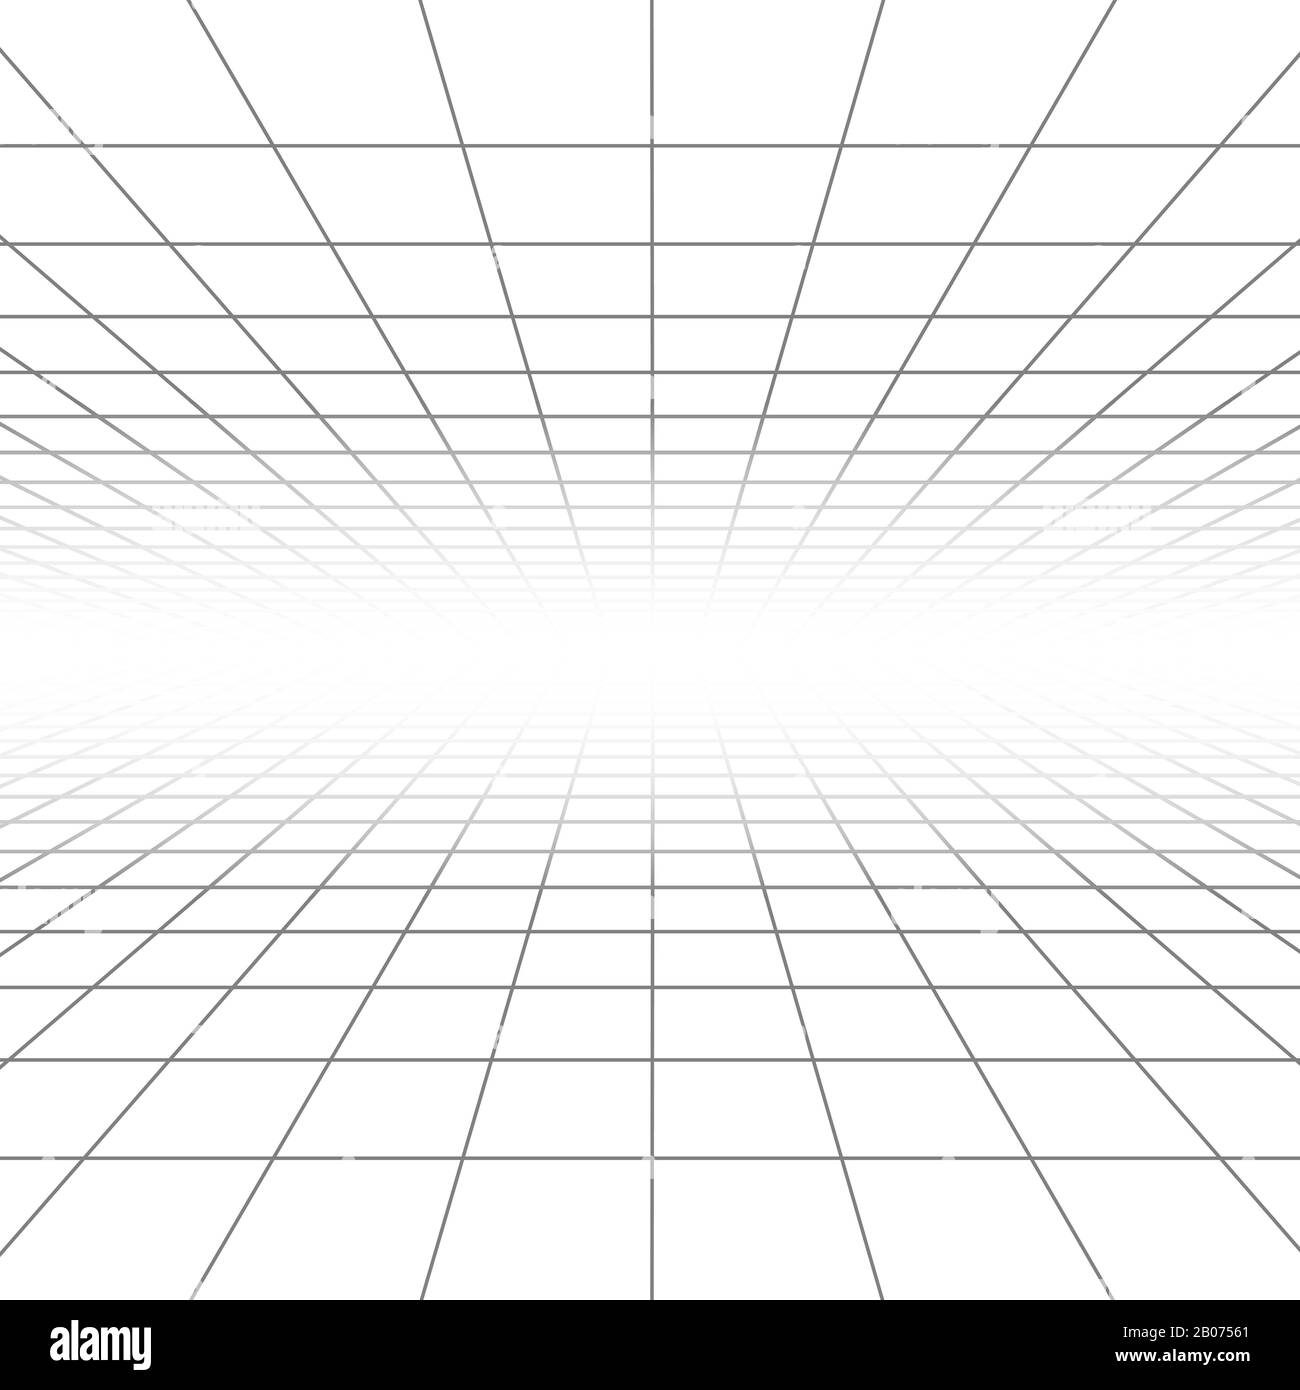 Ceiling and floor perspective grid vector lines, architecture wireframe. Infinity checkered tiled illustration Stock Vector